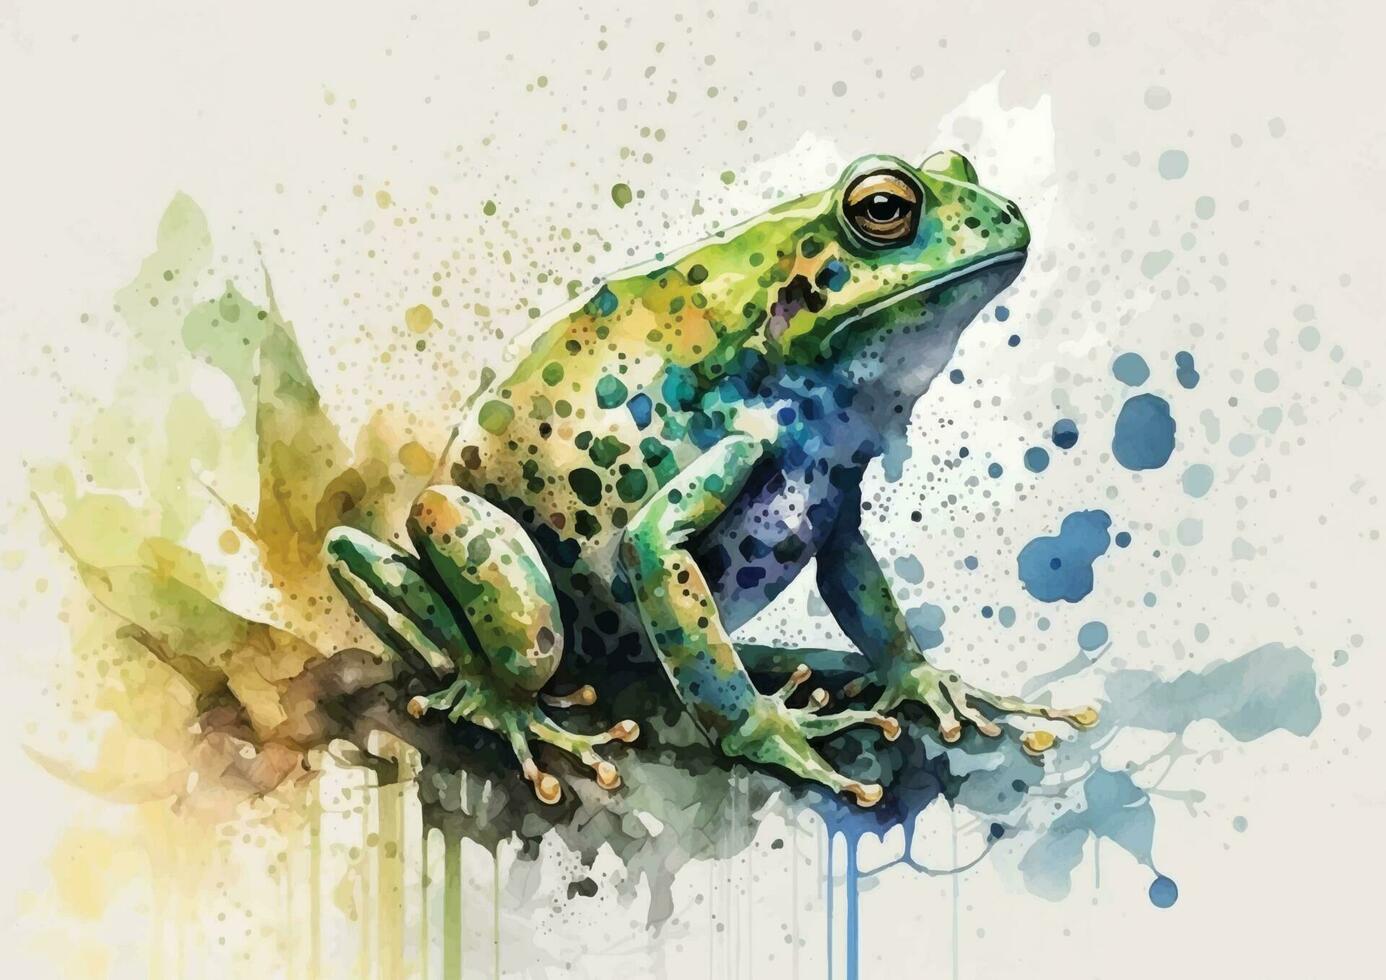 Experience the joy of nature with these whimsical watercolor vector illustrations of frogs and their surroundings